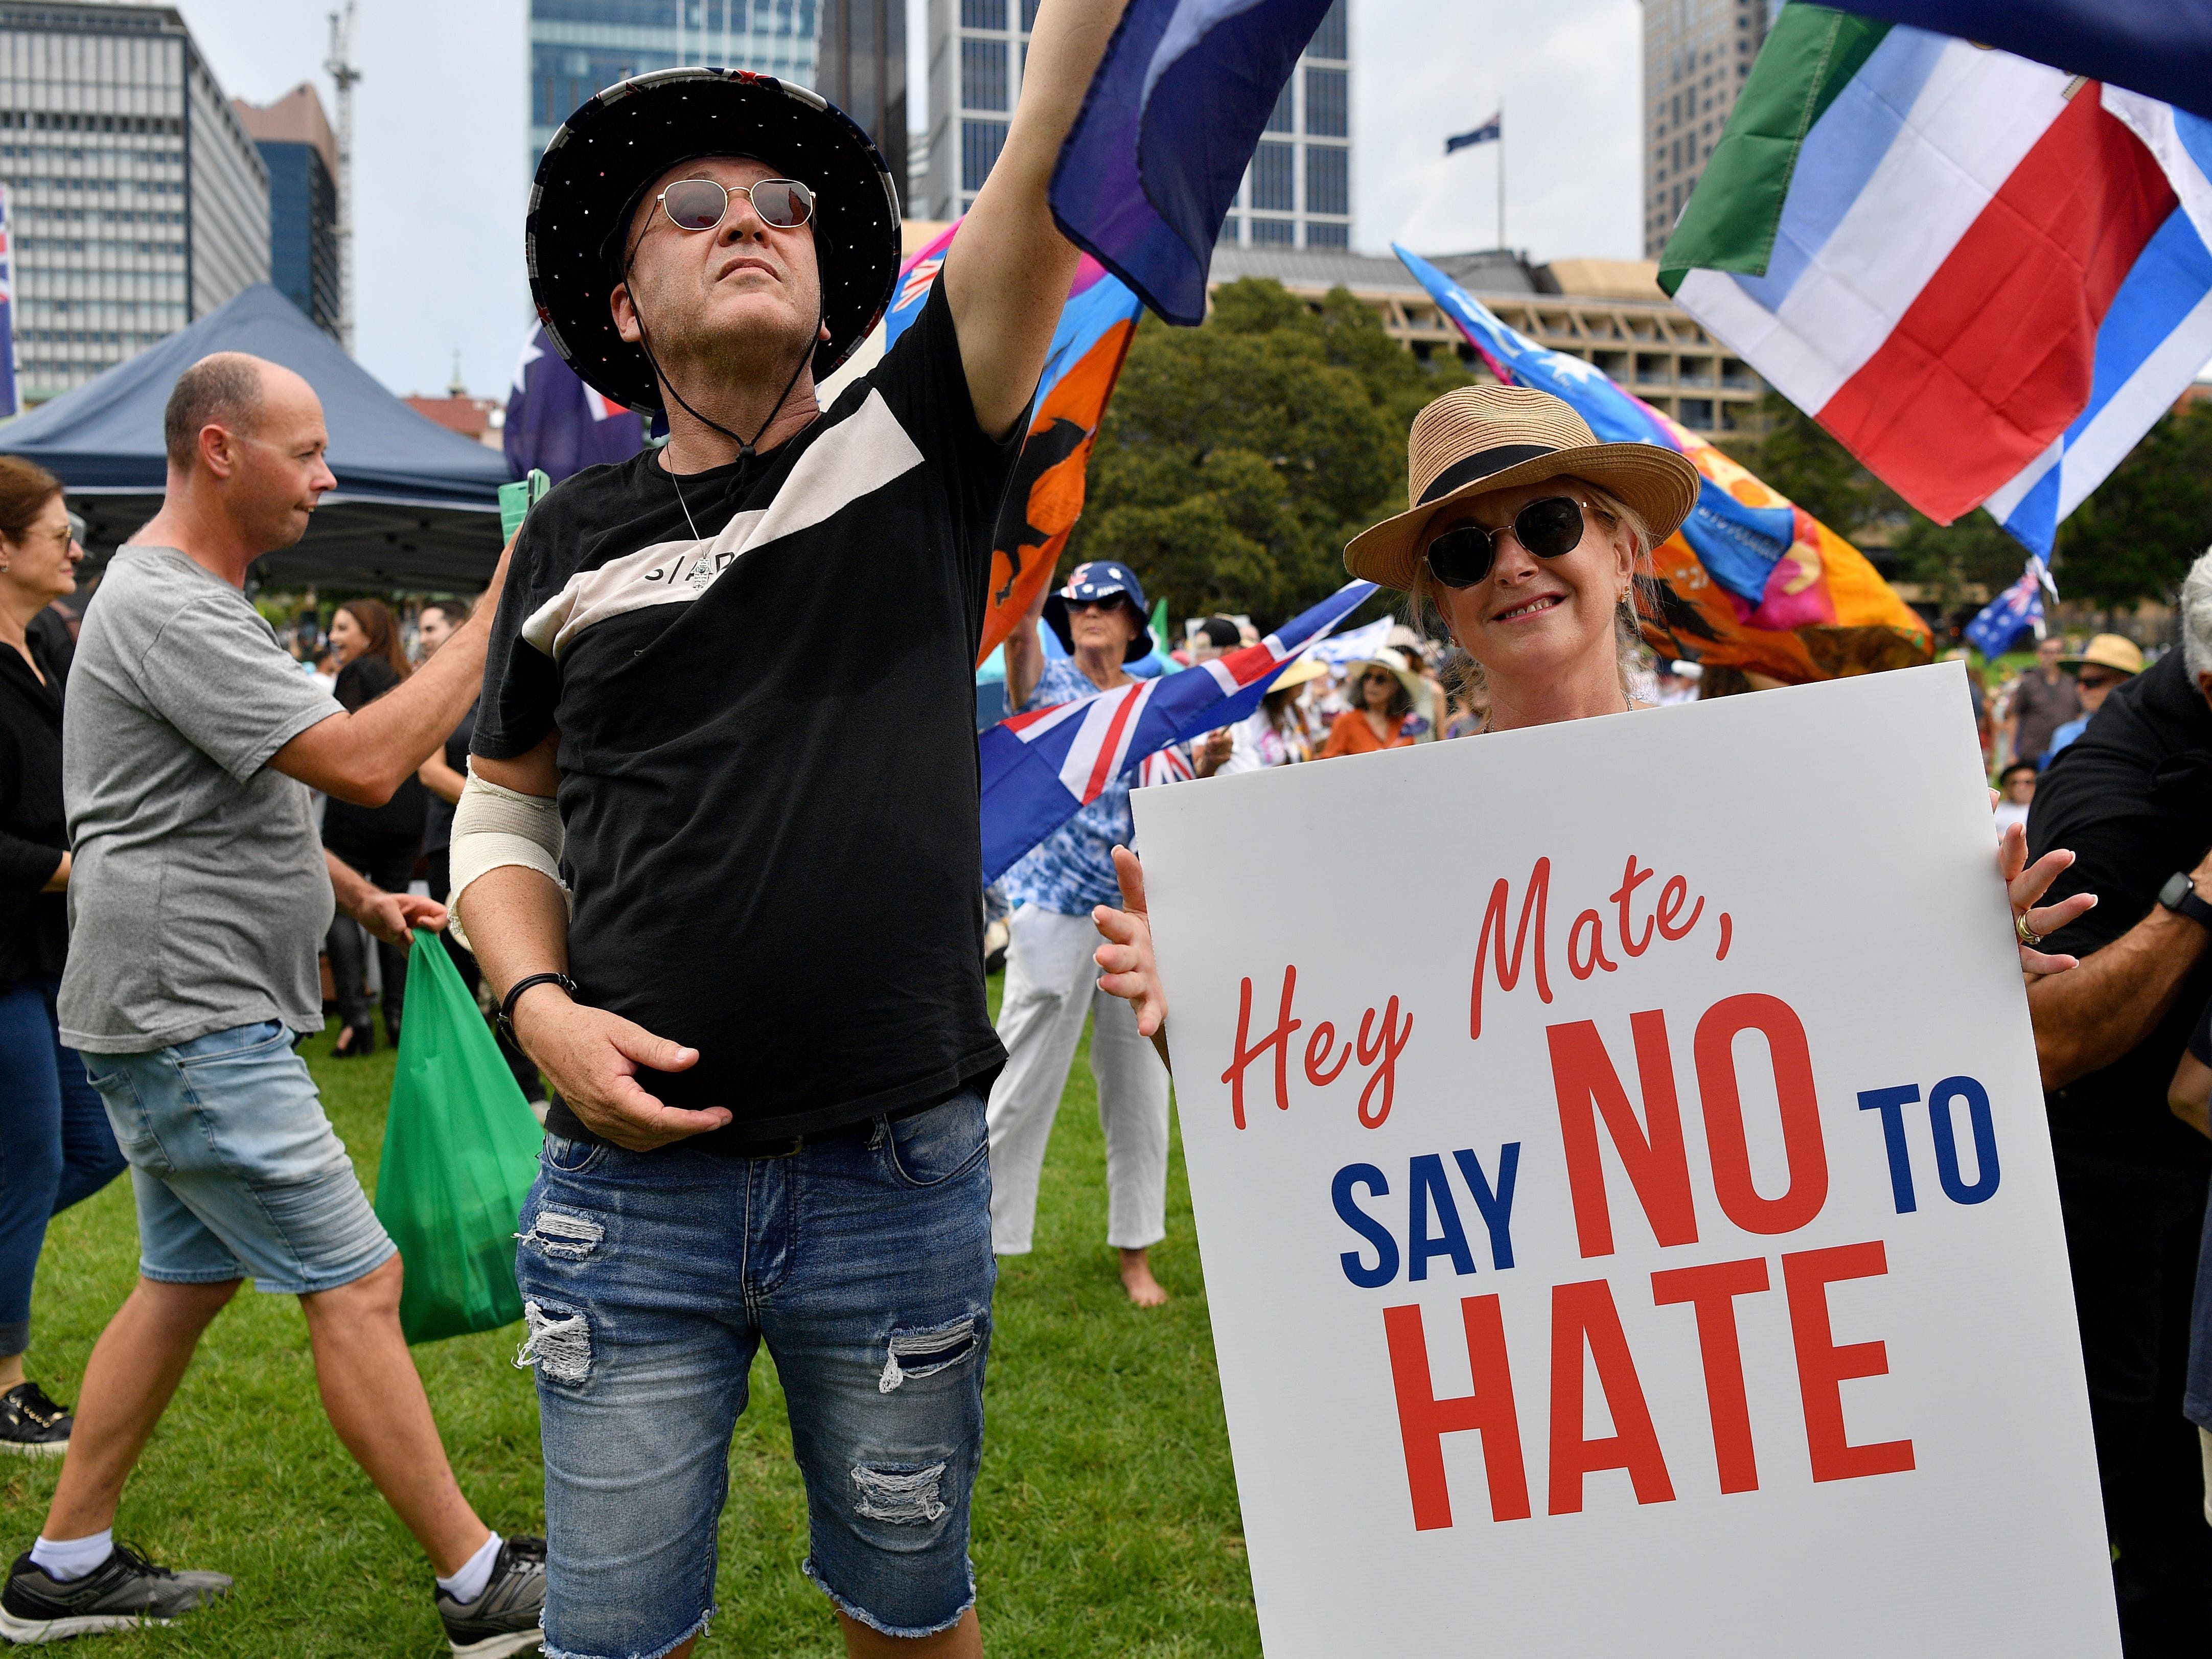 Australian PM appoints envoy to confront rise in antisemitism